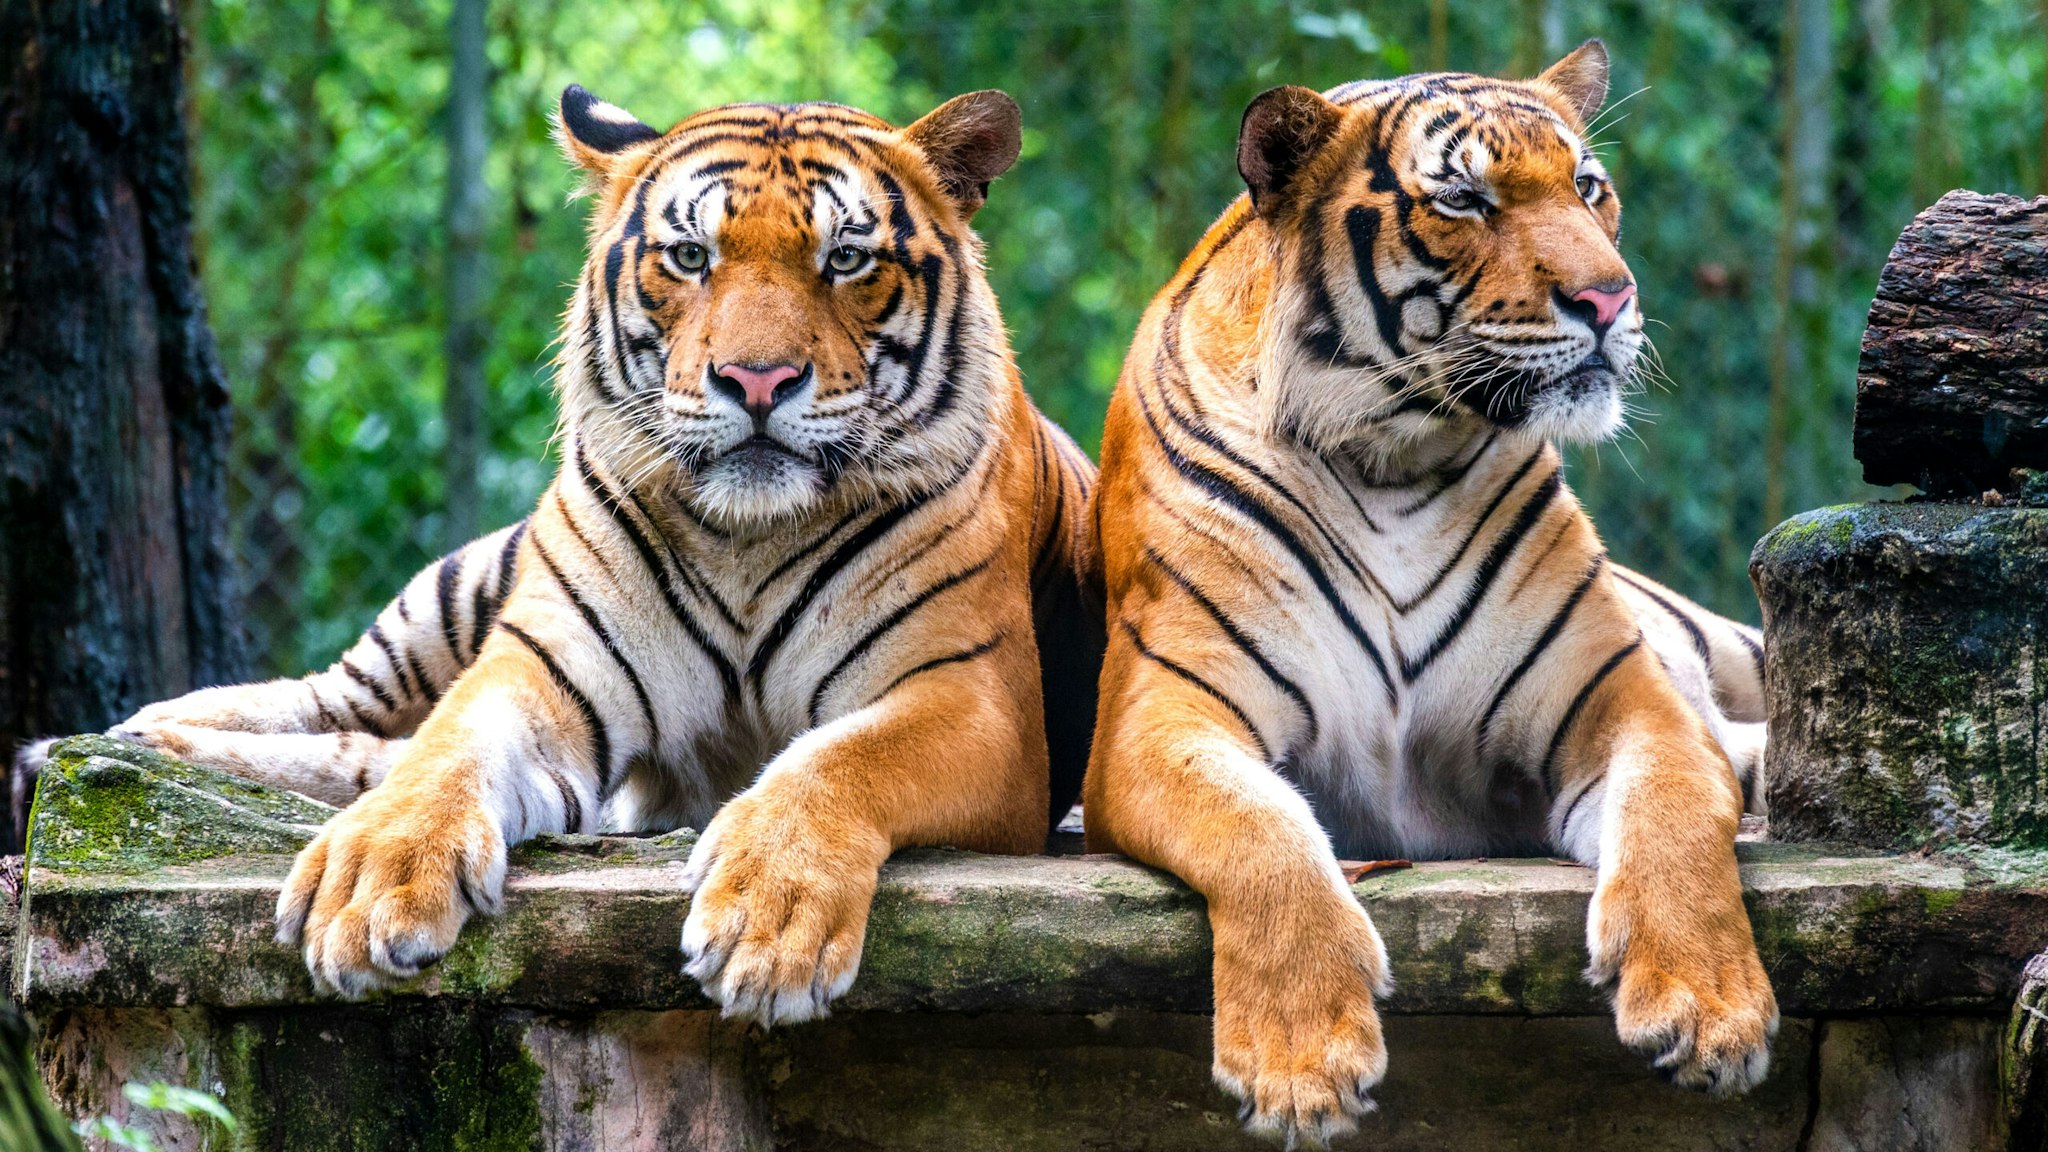 Malayan tigers Wira L and Hebat rest in the enclosure at Zoo Negara near Kuala Lumpur, Malaysia, Feb. 27, 2022. TO GO WITH "Feature: Malayan tiger faces oblivion without concerted action"